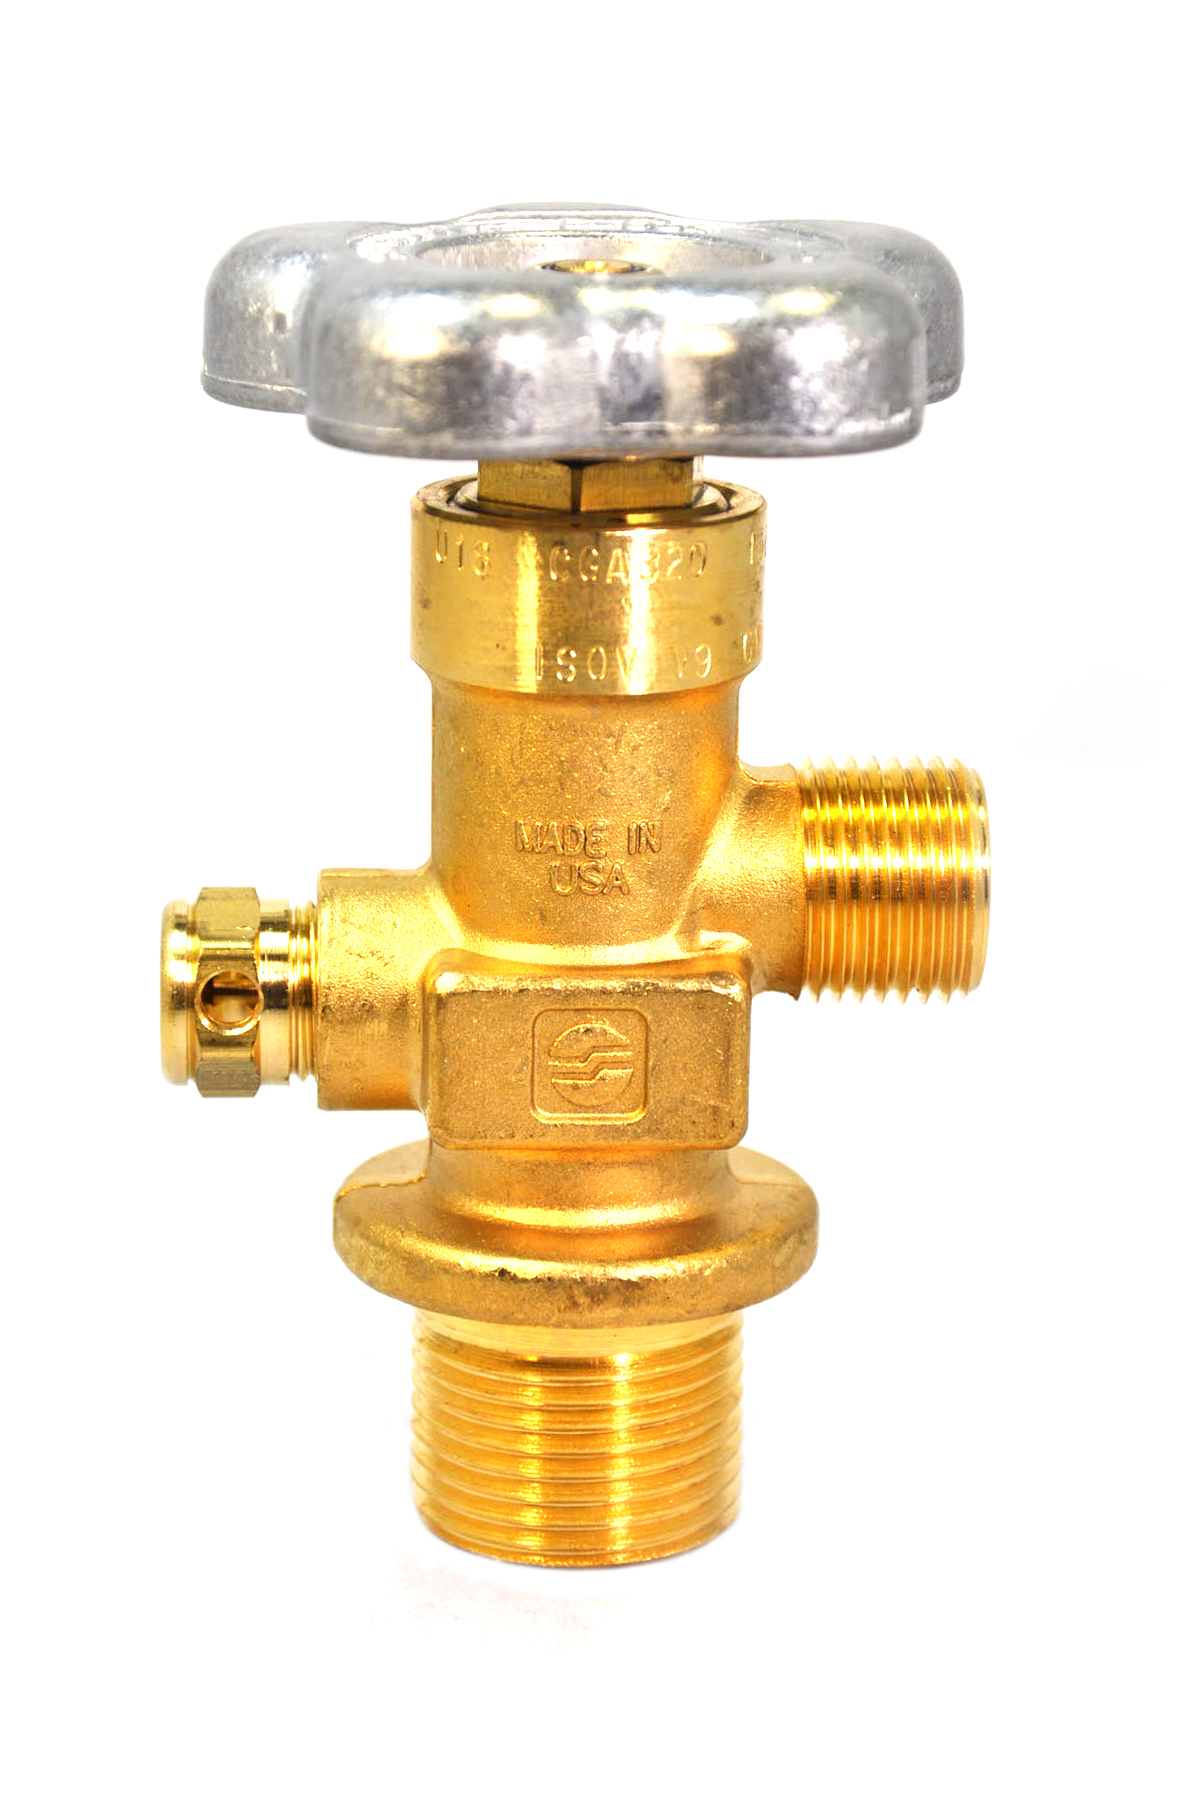 1.0" NGT TAPERED THREAD SHERWOOD CO2 VALVE FOR STEEL TANKS 